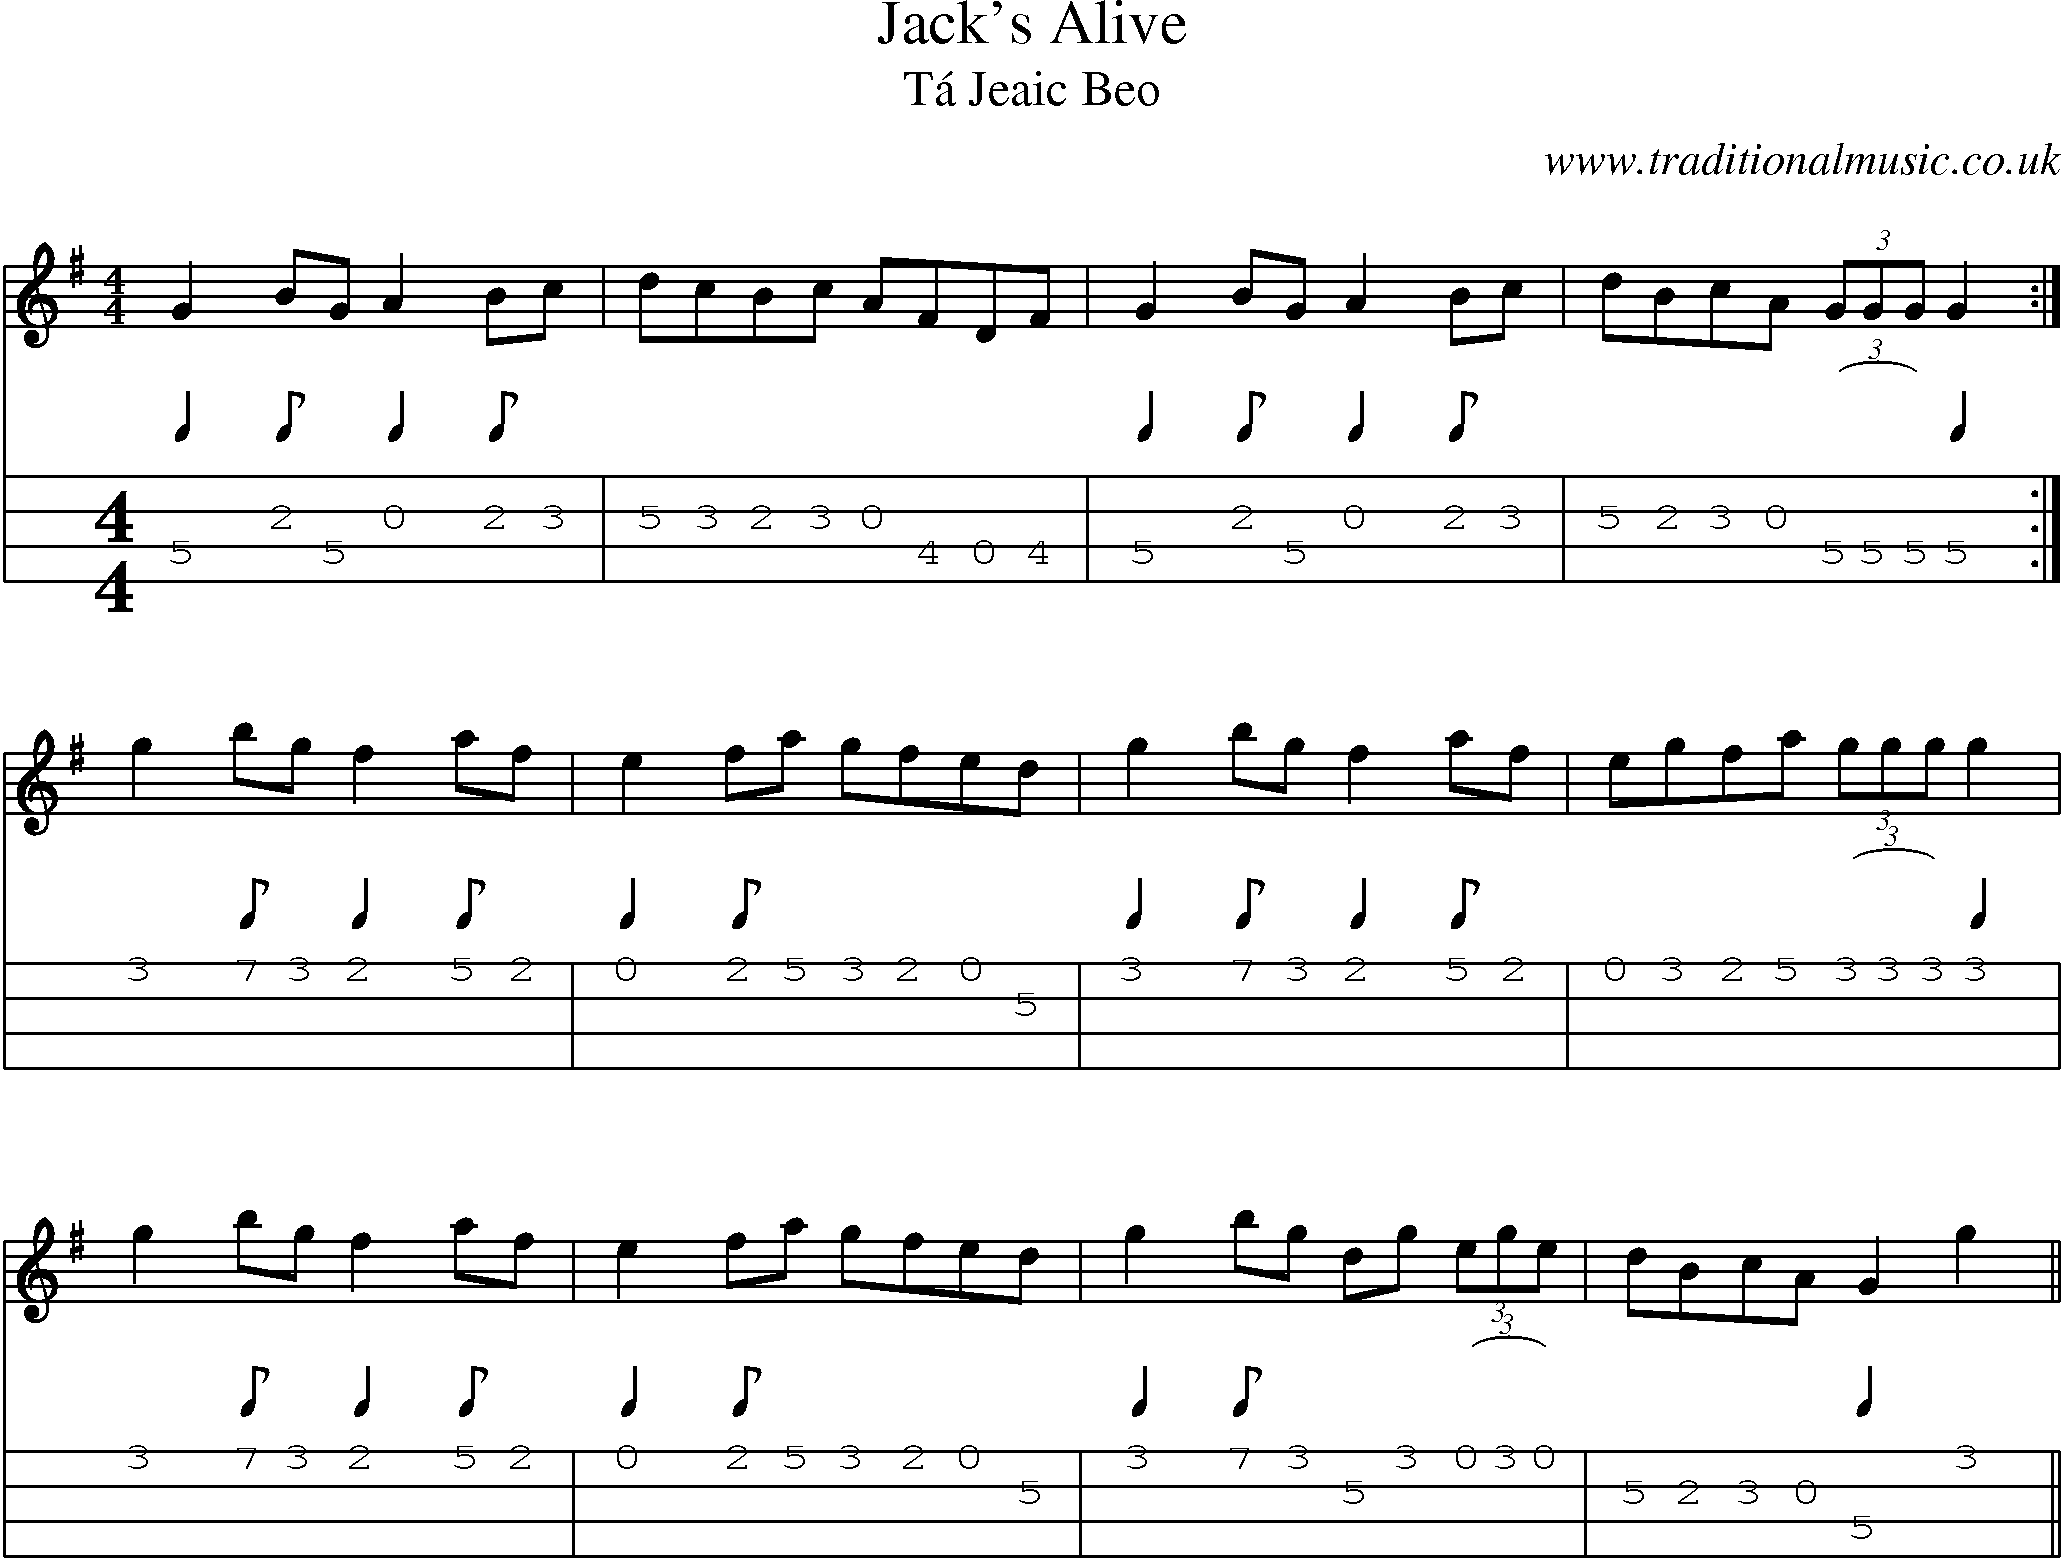 Music Score and Mandolin Tabs for Jacks Alive